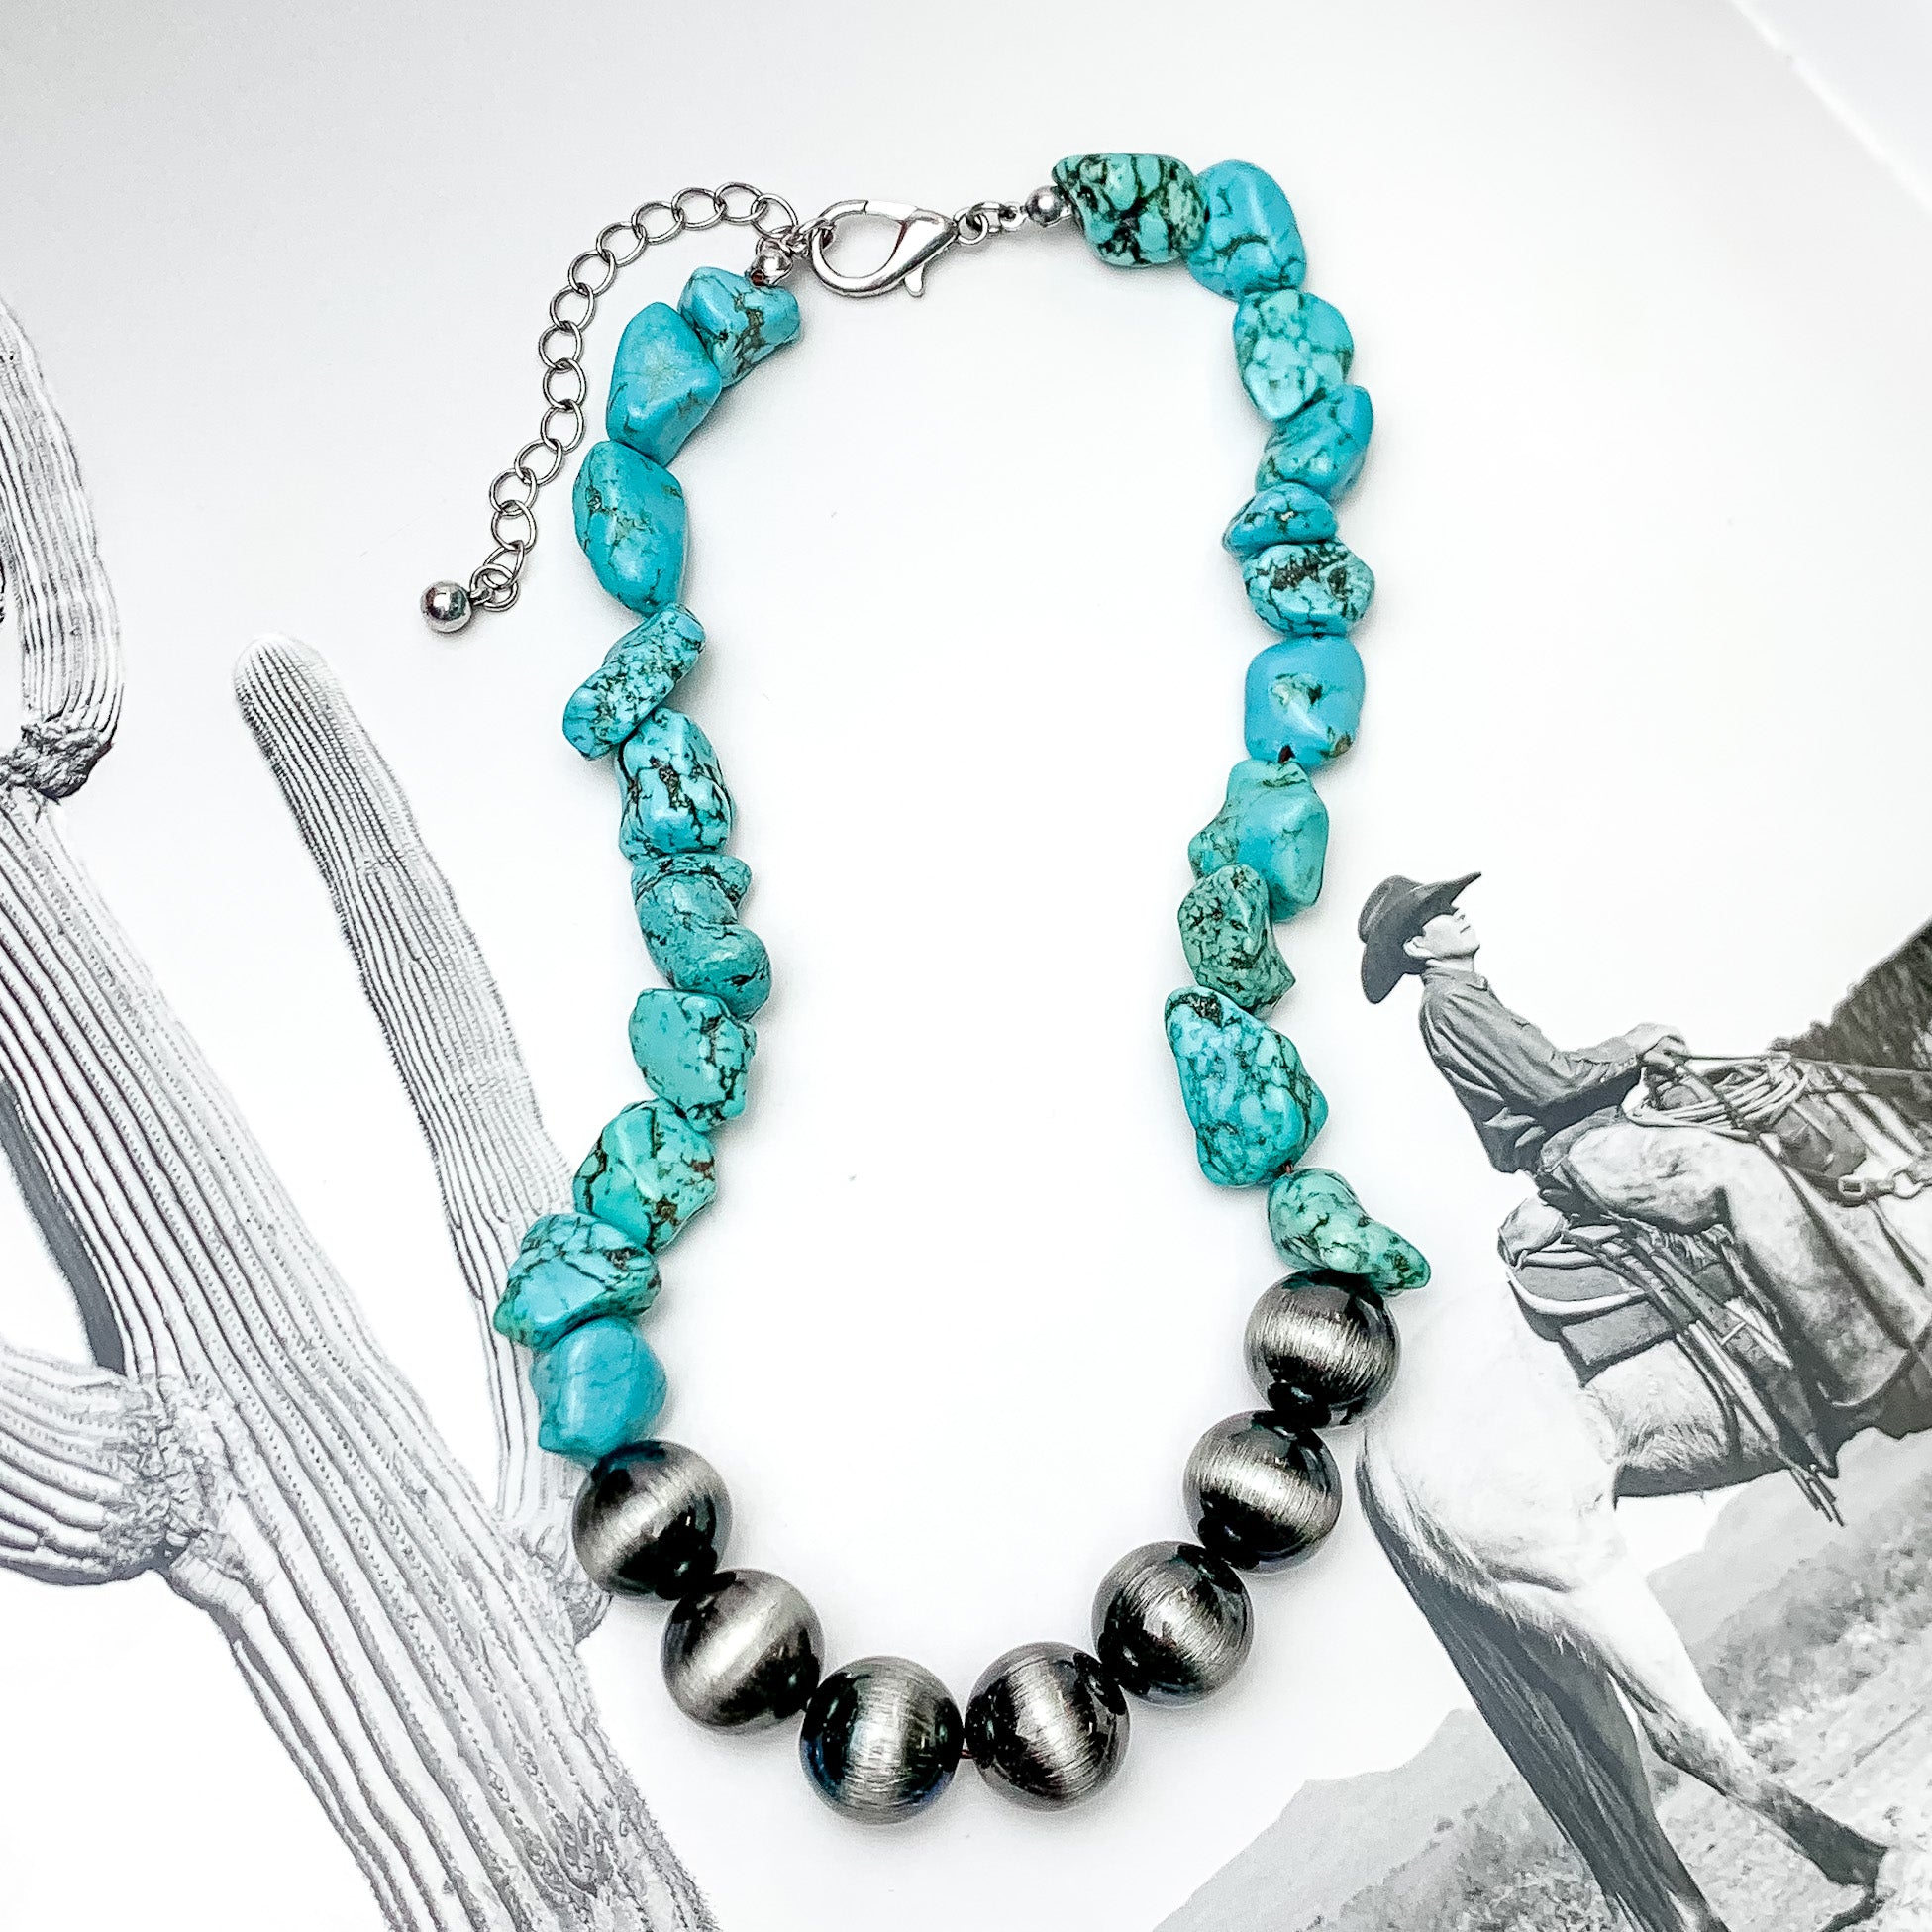 Turquoise Stone Necklace With Silver Tone Beads. Pictured on a western background.